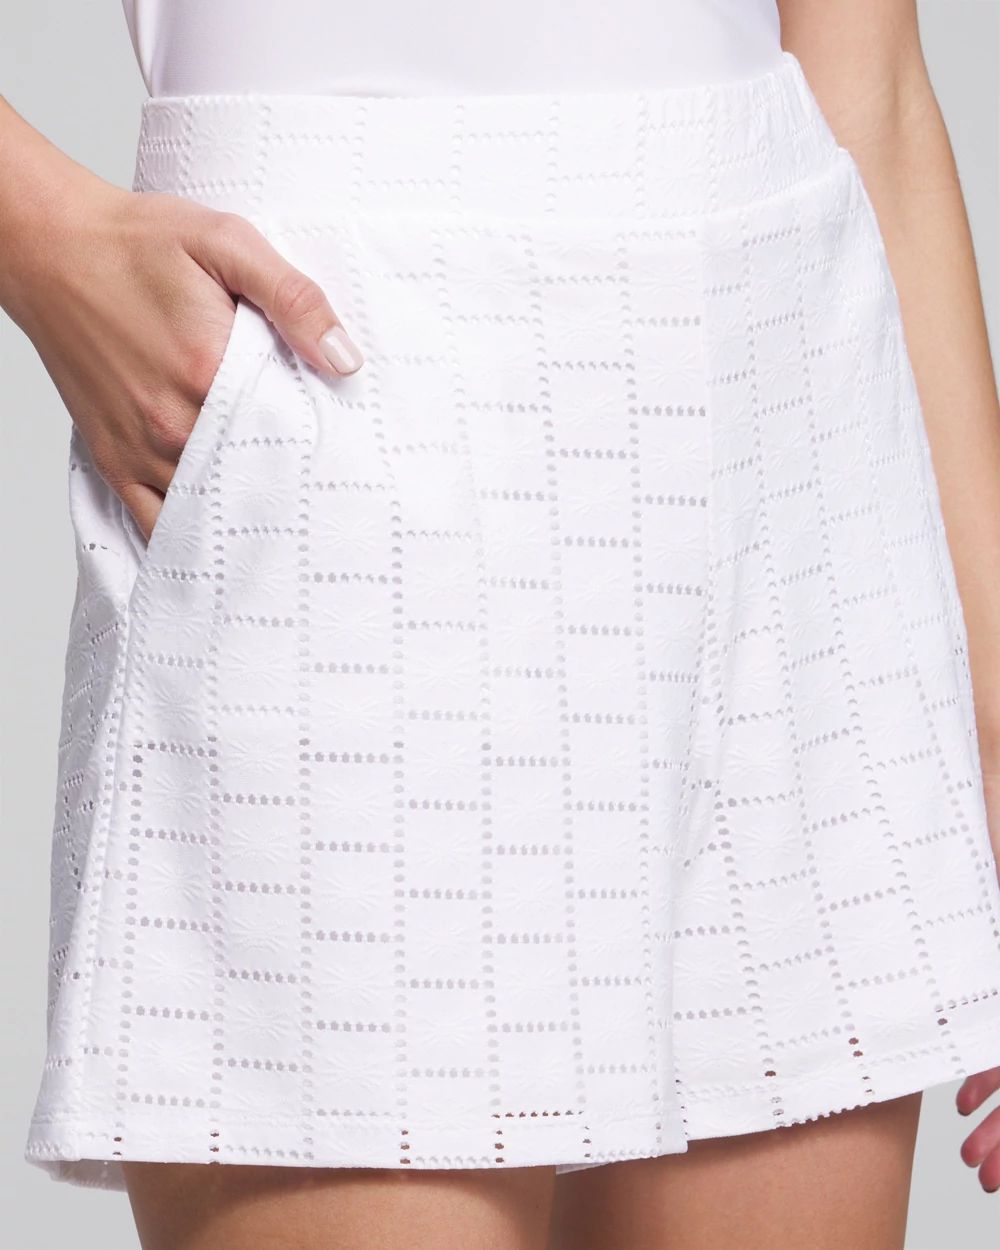 Outlet WHBM Eyelet Shorts click to view larger image.